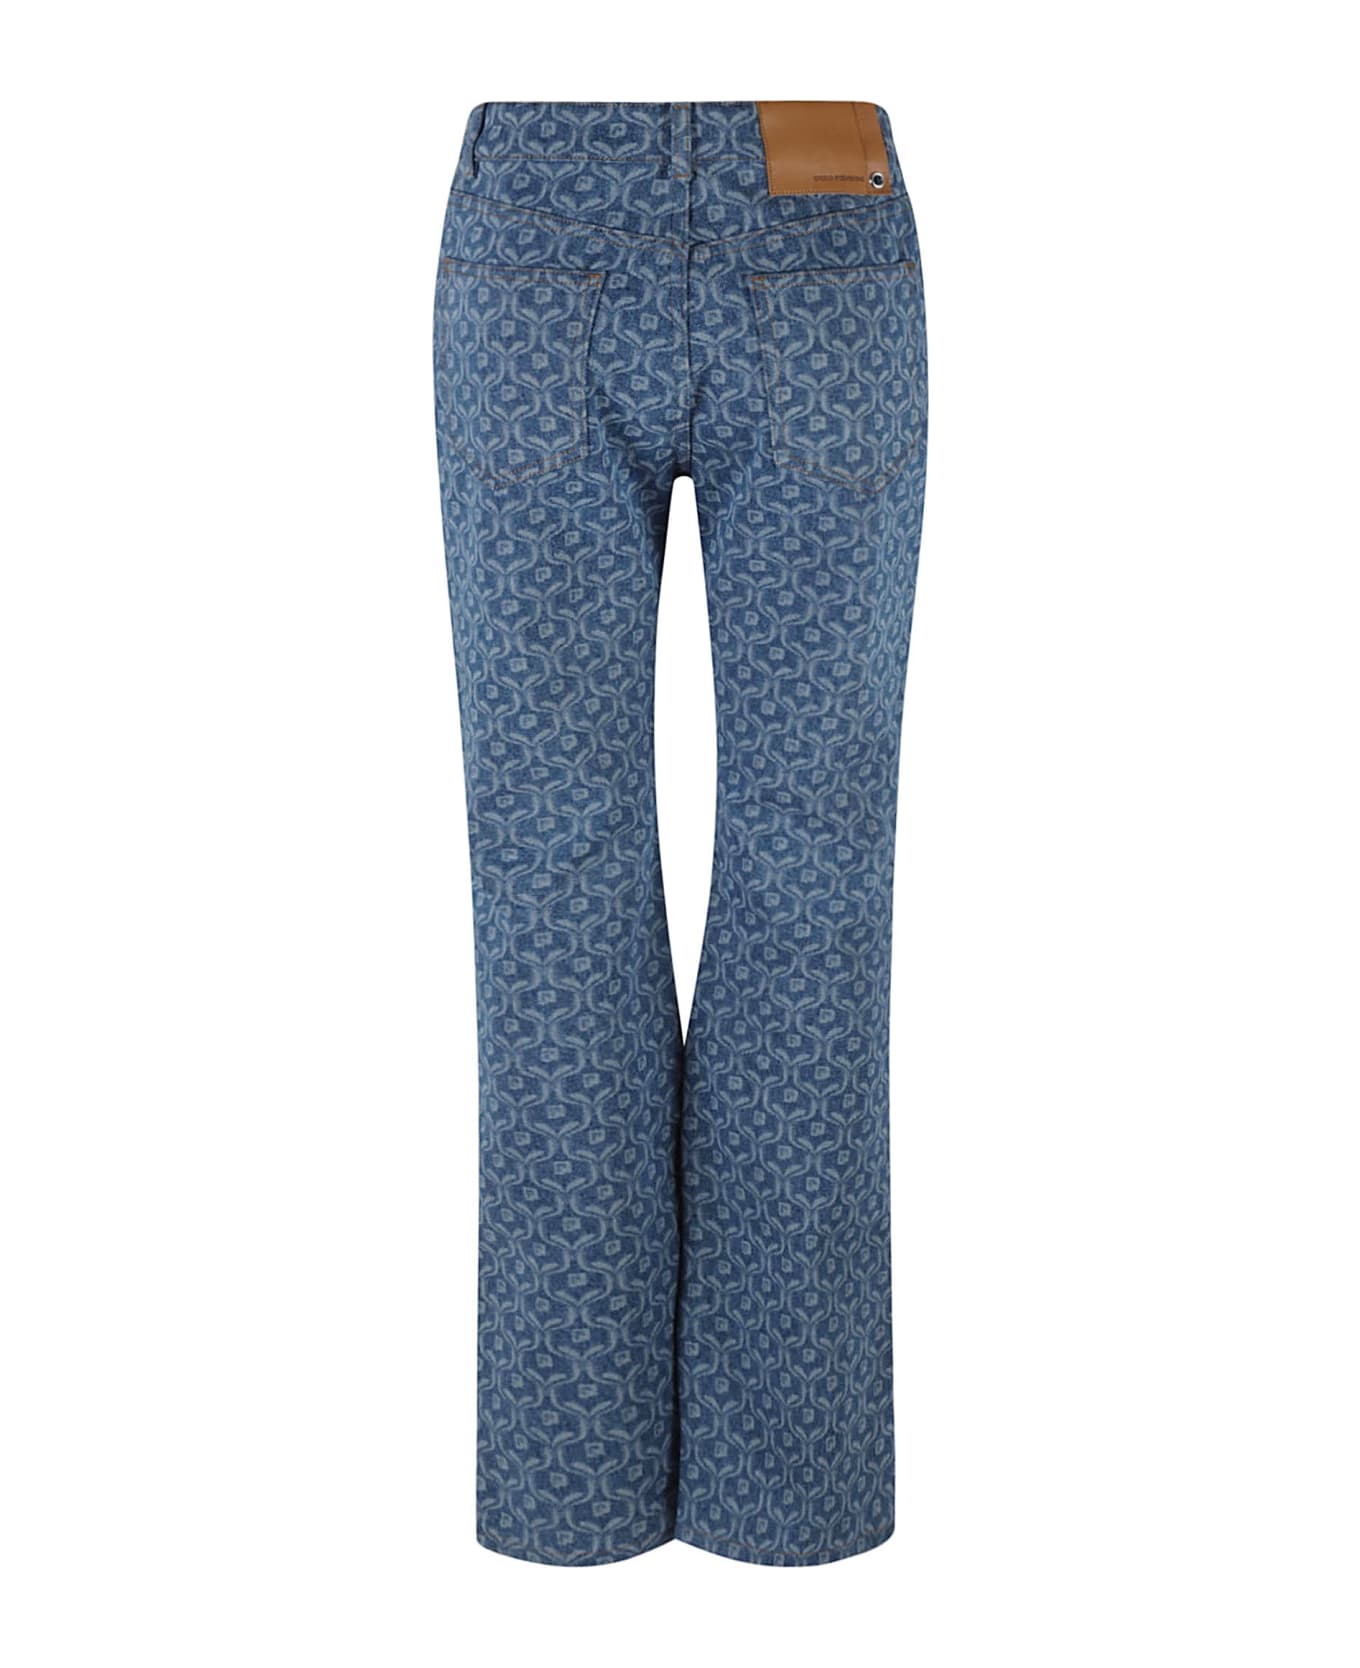 Paco Rabanne Printed Buttoned Jeans - M412